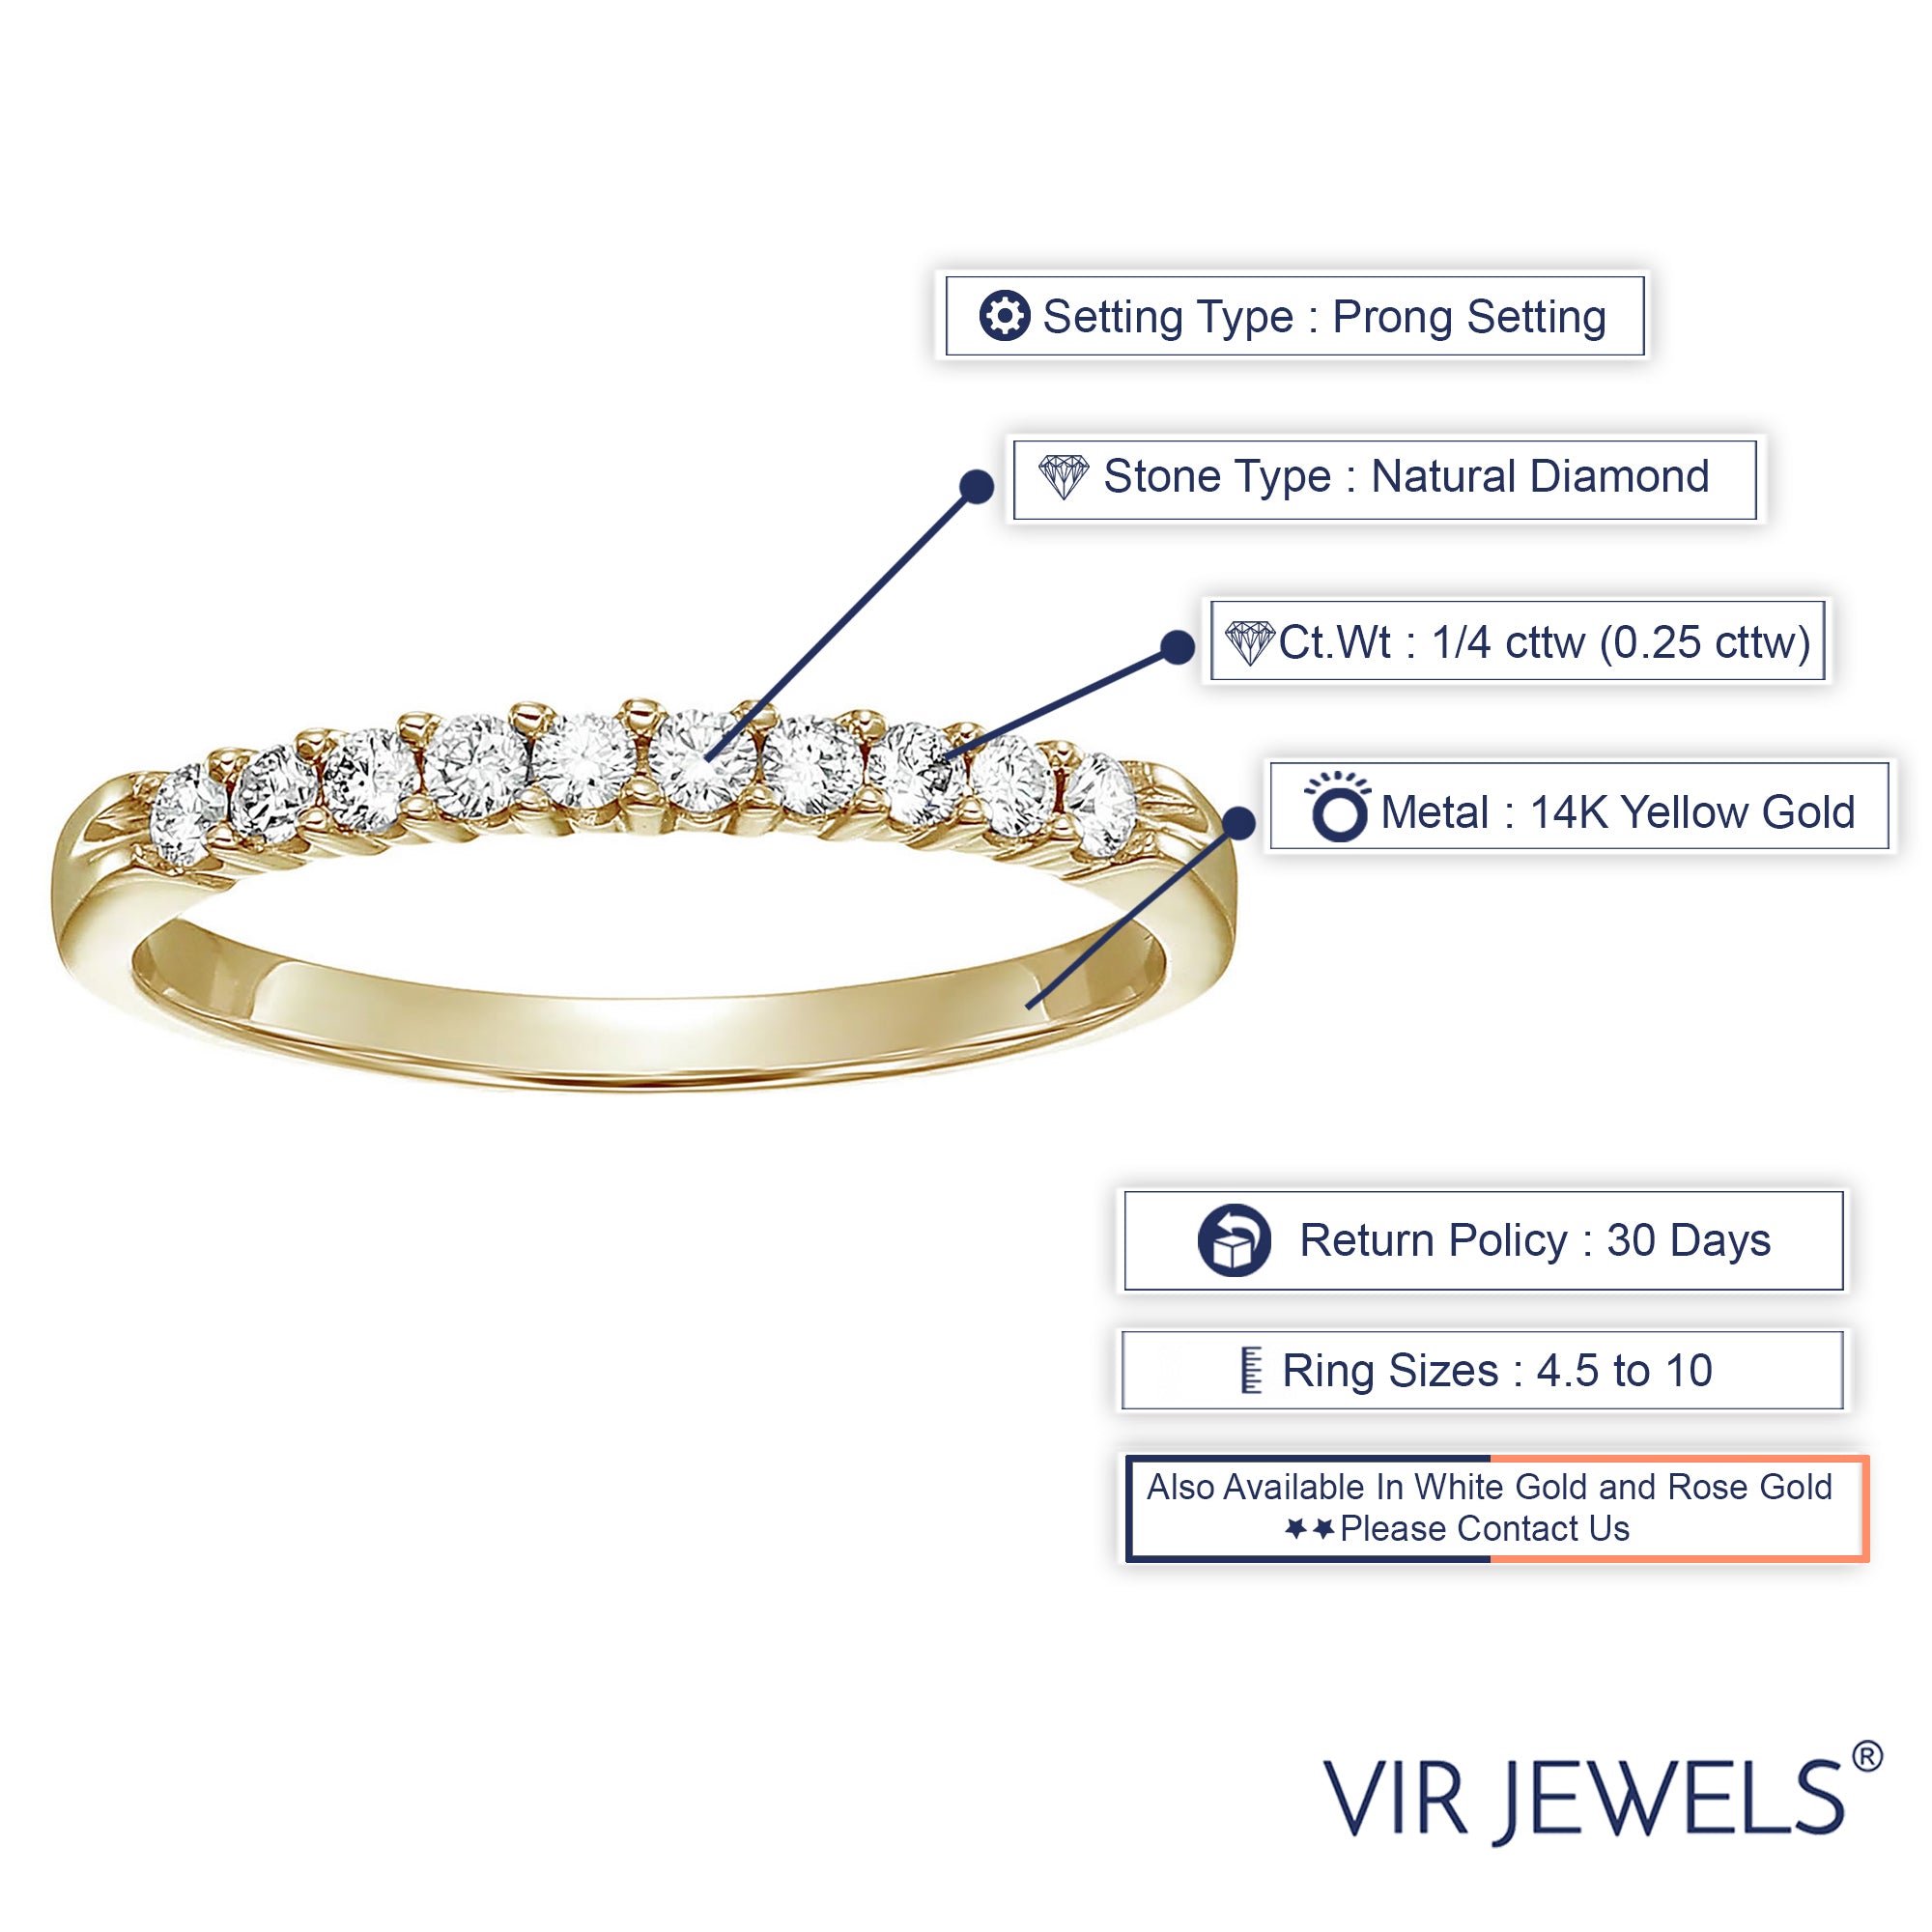 1/4 cttw Round Diamond Wedding Band for Women in 14K Yellow Gold, 10 Stones Prong Set, Size 4.5-10